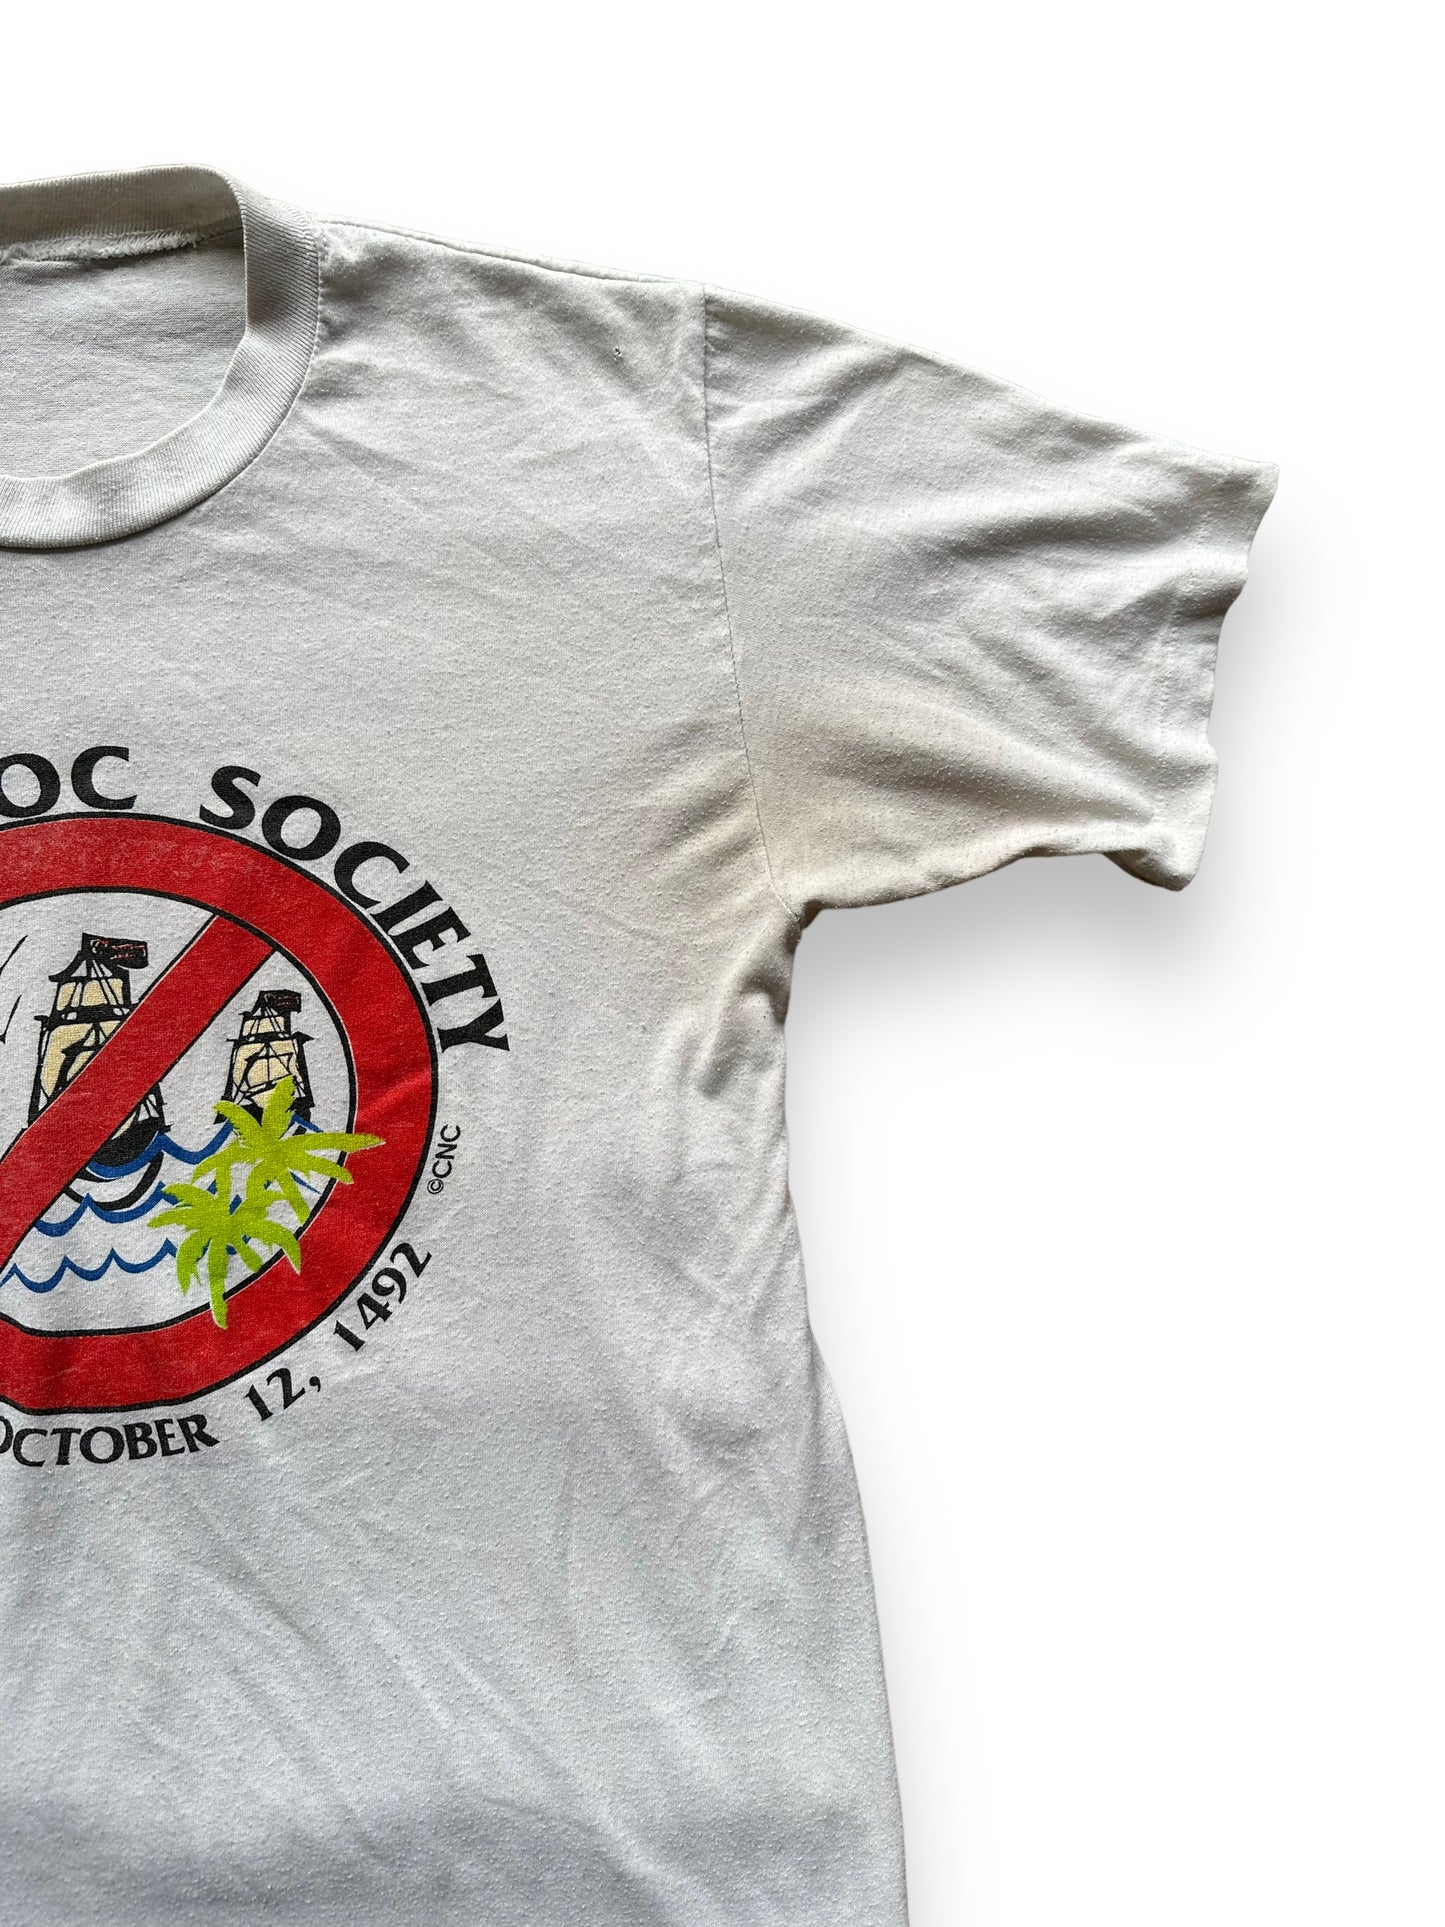 Slight Pitting on Left Pit of Vintage Submuloc First Nations Anti-Columbus Tee SZ M | Vintage Graphic T-Shirts Seattle | Barn Owl Vintage Tees Seattle